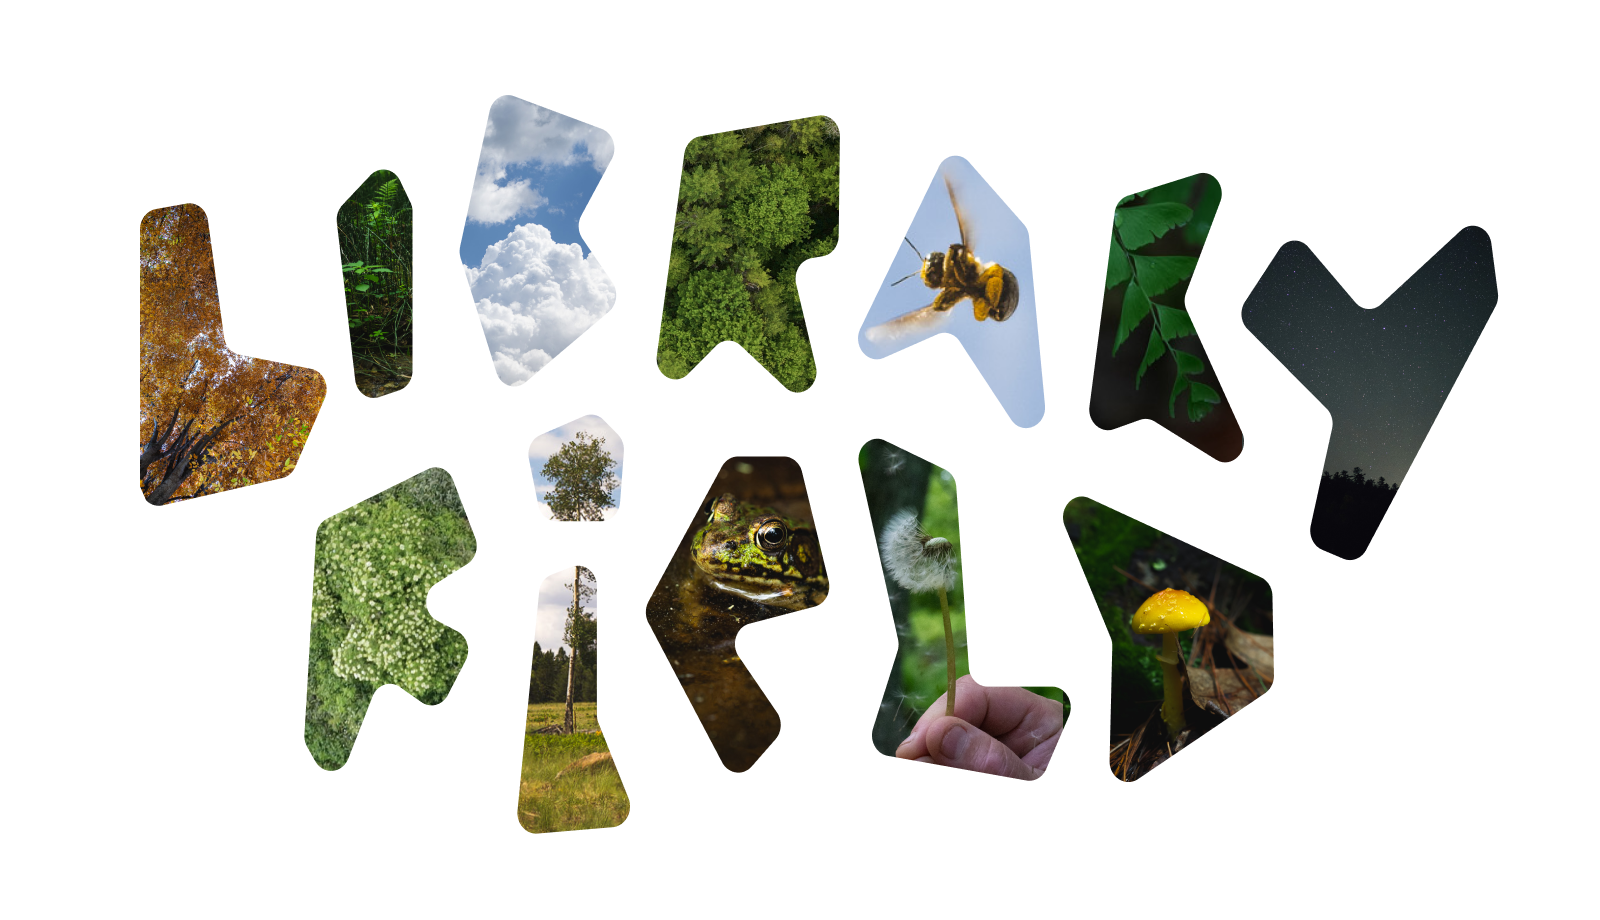 photos of various natural elements collaged into the letters of Library Field